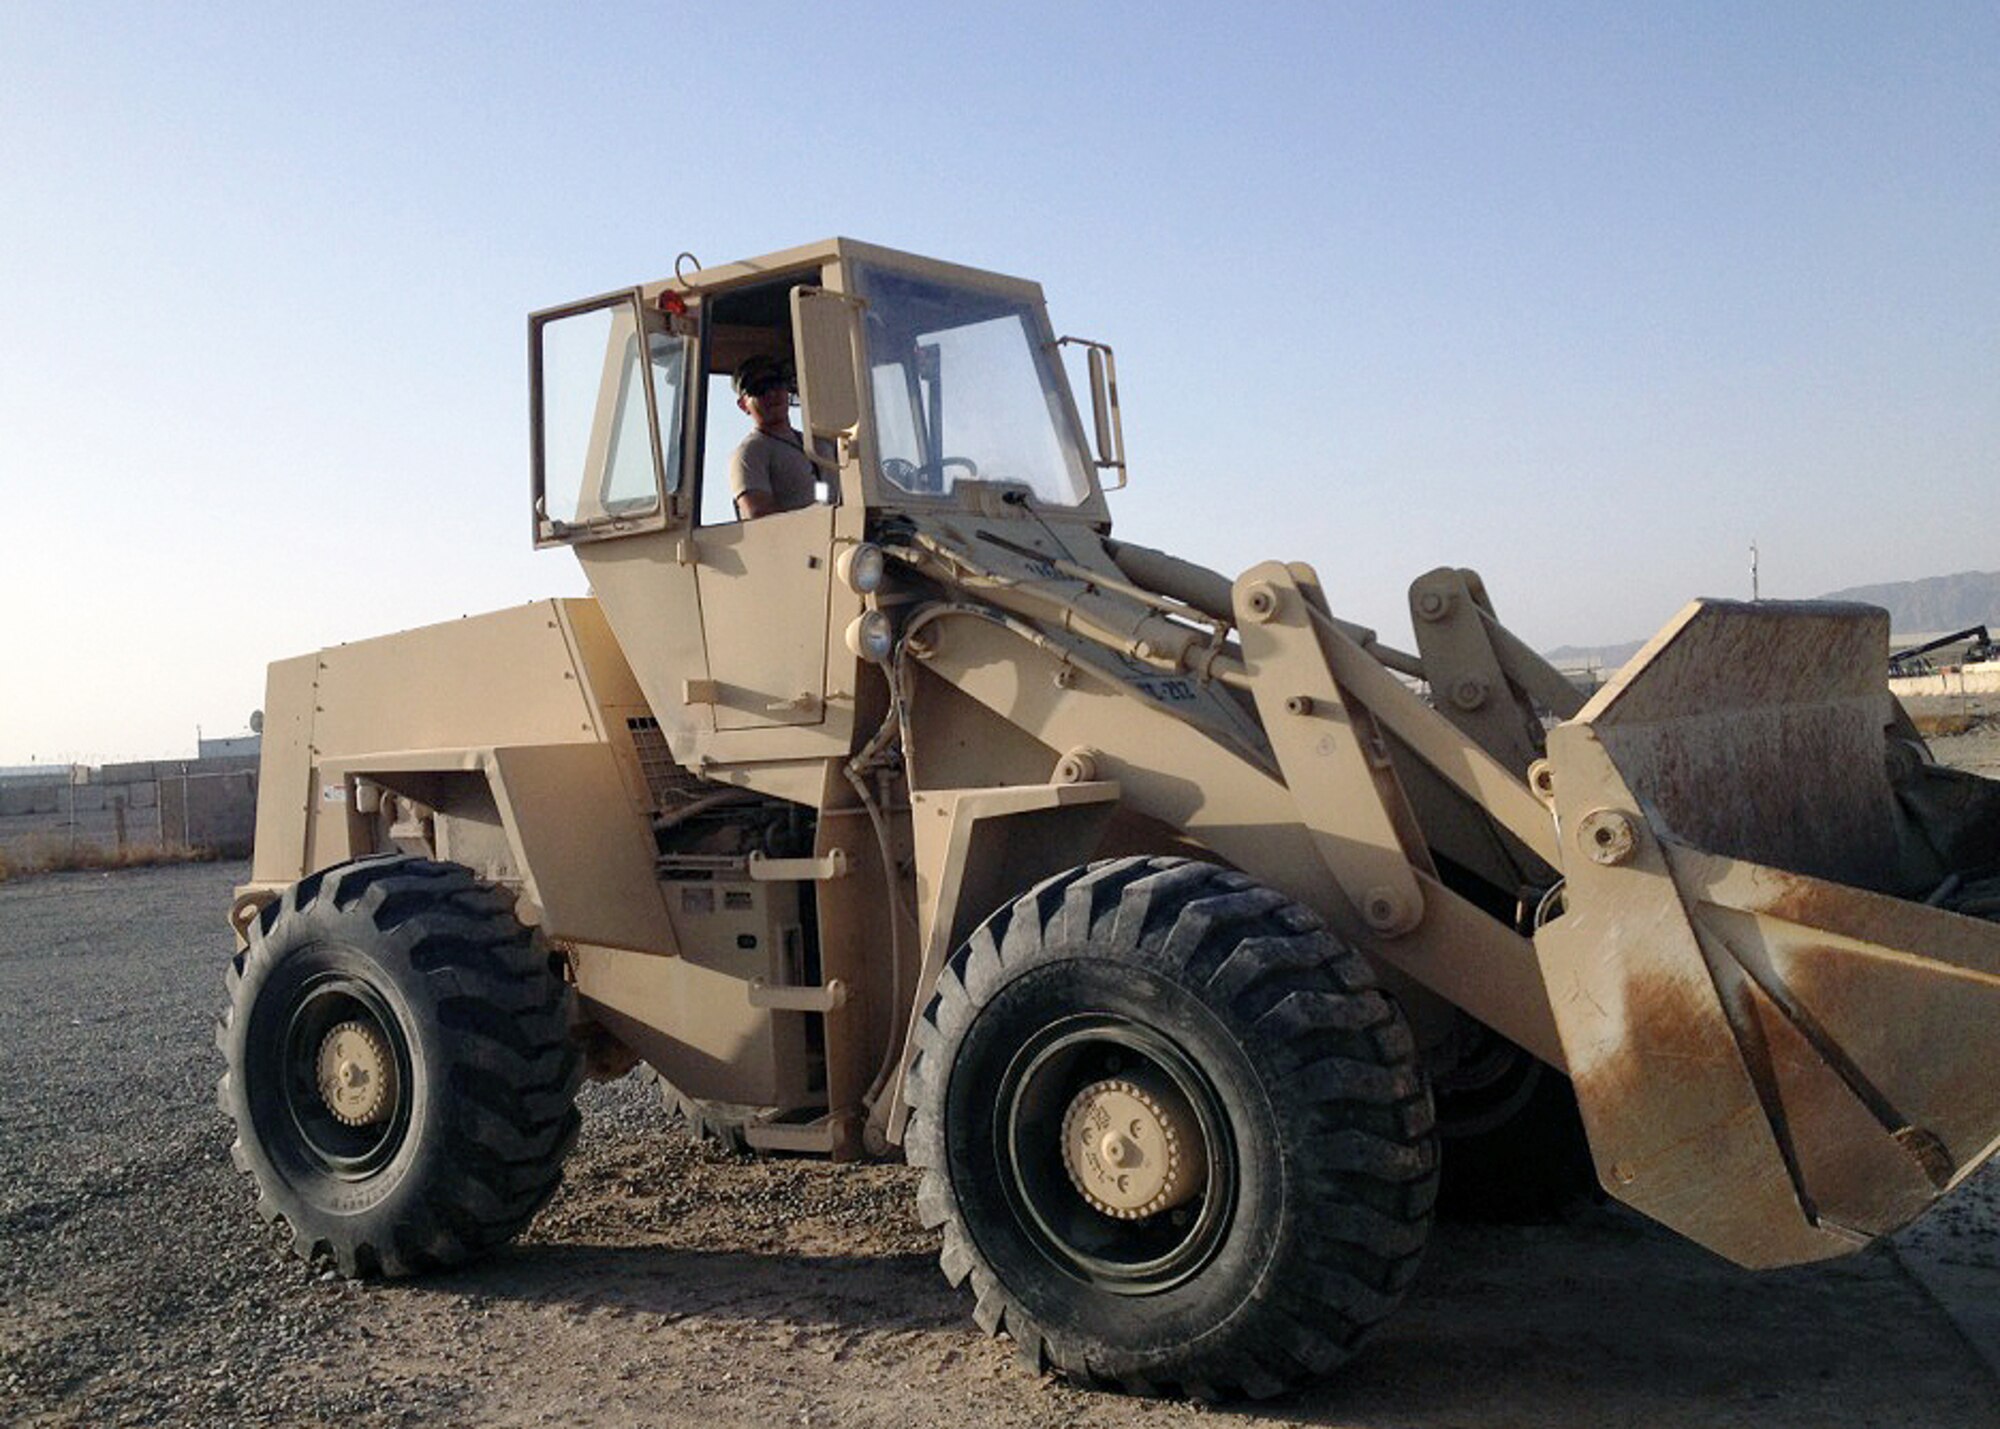 U.S. Air Force Staff Sgt. Gabriel Lara-Ortega, 451st Expeditionary Support Squadron Civil Engineer NCO in charge, loads reclaimed gravel from a vacant camp into a dump truck for use on an access road Feb. 13, 2015 at Kandahar Airfield, Afghanistan. Part of a two-man team, Lara-Ortega and 1st Lt. Tim Lord, 451 CE flight Commander, execute the functions of an average Air Force civil engineer squadron, usually comprised of more than 100 Airmen. (U.S. Air Force courtesy photo/released)